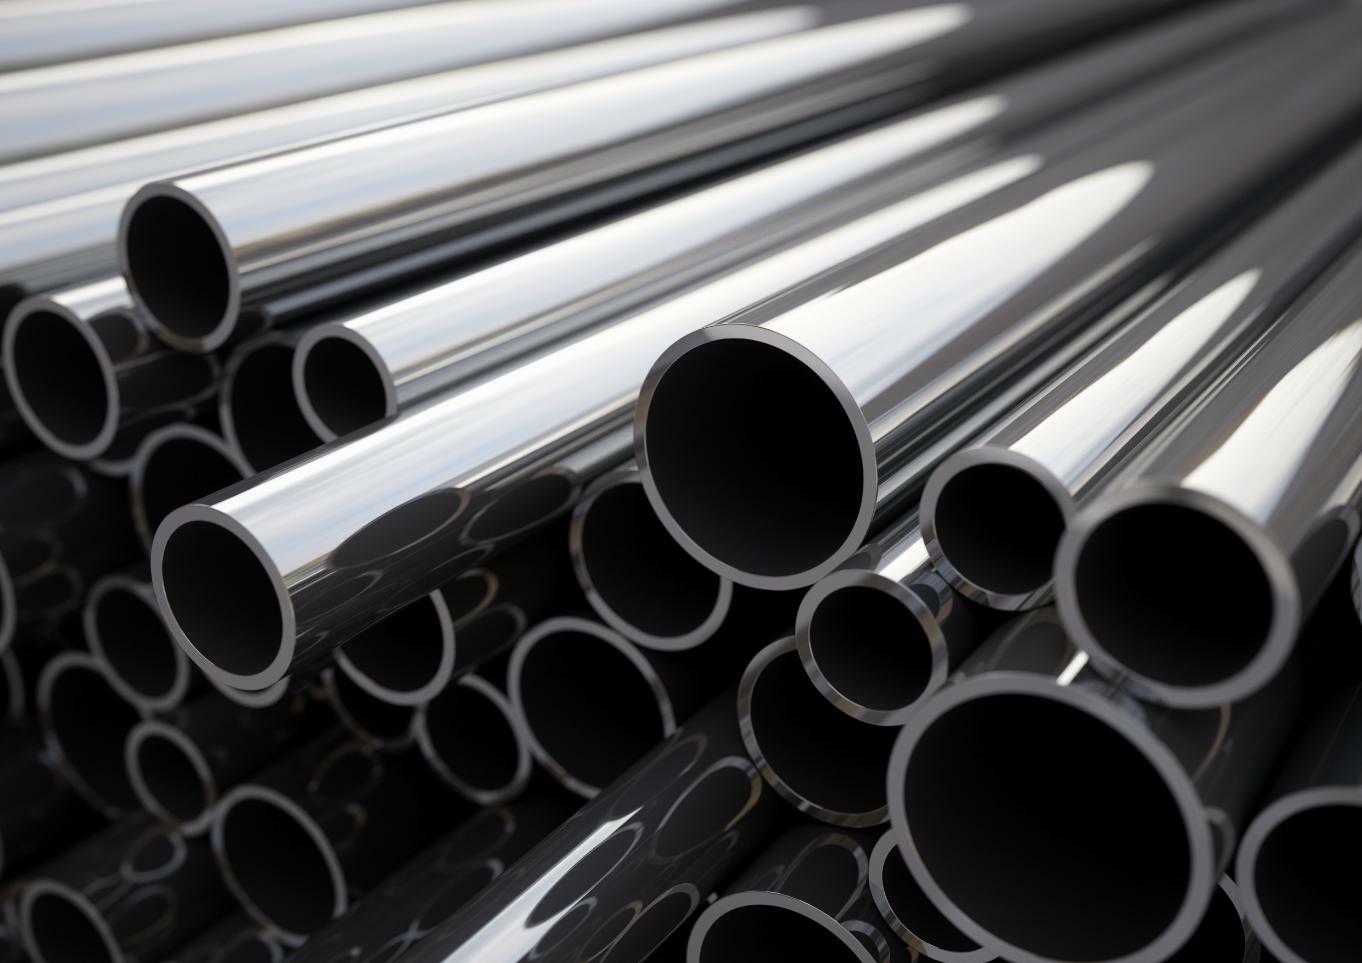 round, square, and rectangular  stainless steel tubing